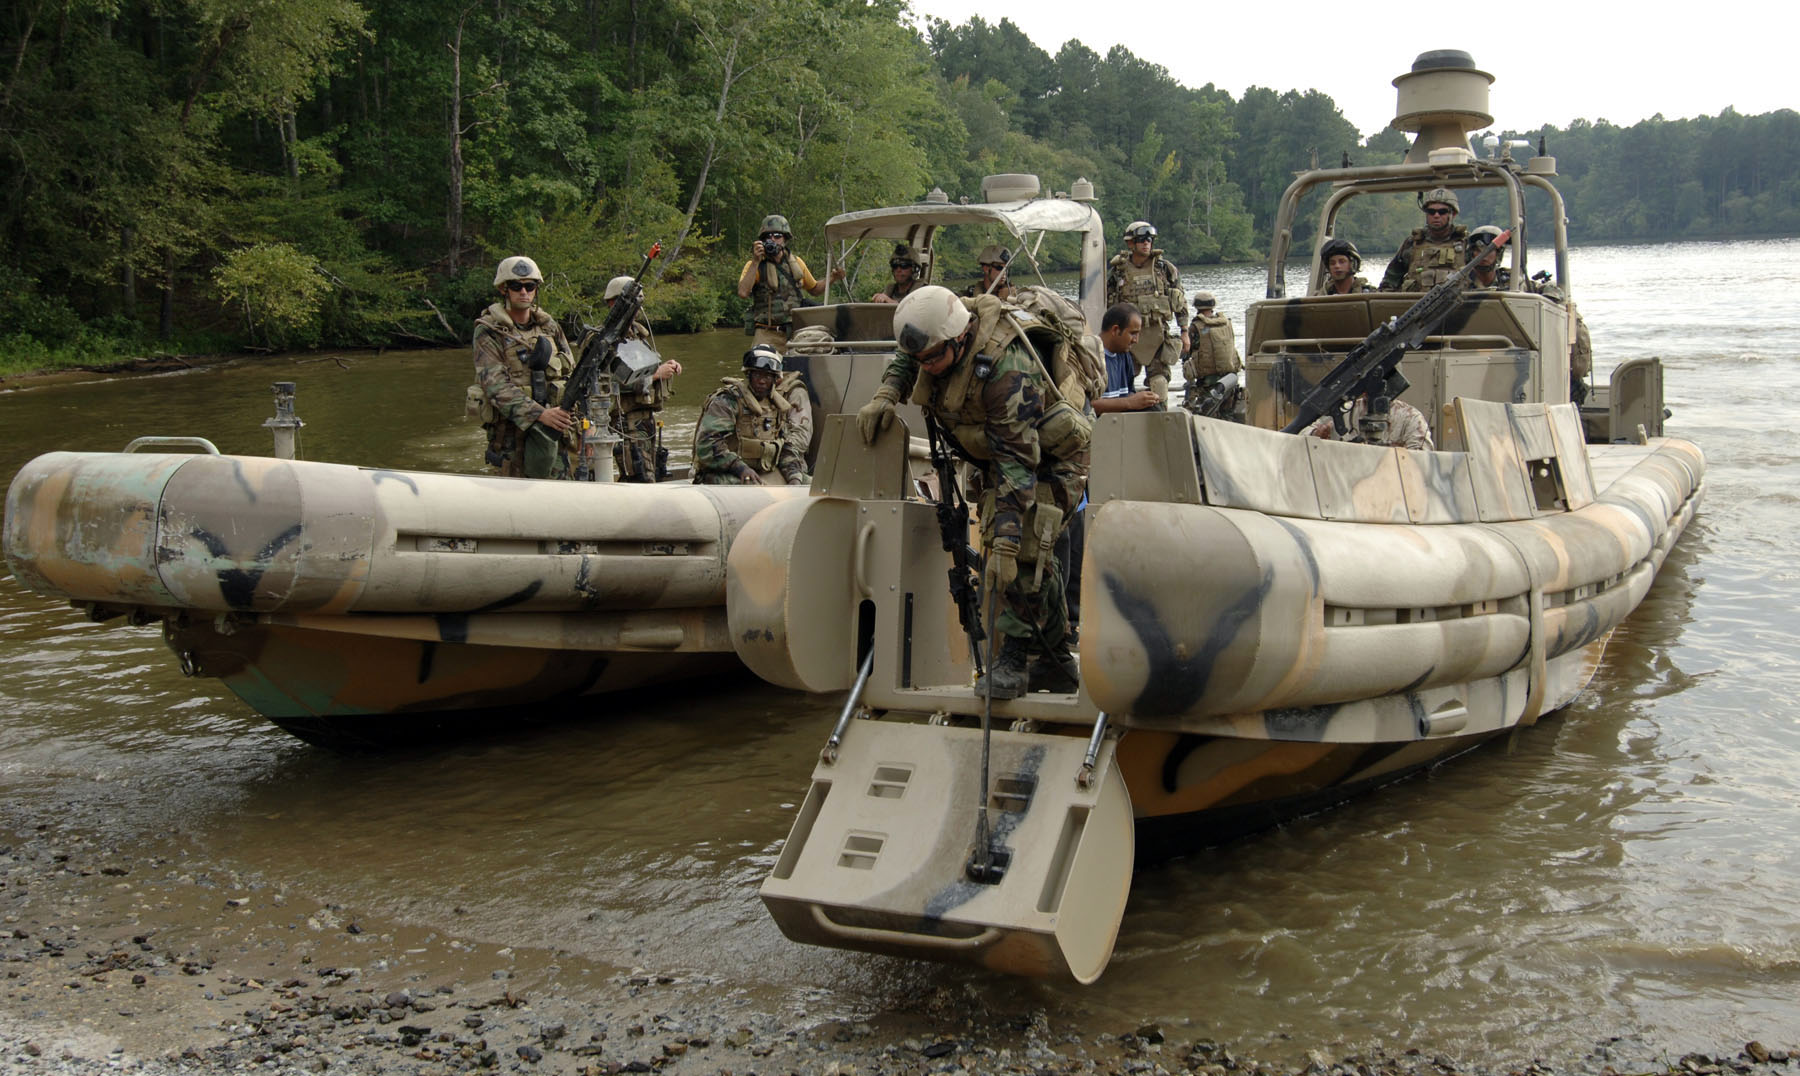 US_Navy_070910-N-6639M-043_Sailors_assigned_to_Riverine_Squadron_%28RIVRON%29_2_come_ashore_with_two_simulated_detainees_to_be_turned_over_to_Mobile_Security_Squadron_3%2C_Det._33%2C_during_COMET_2007.jpg